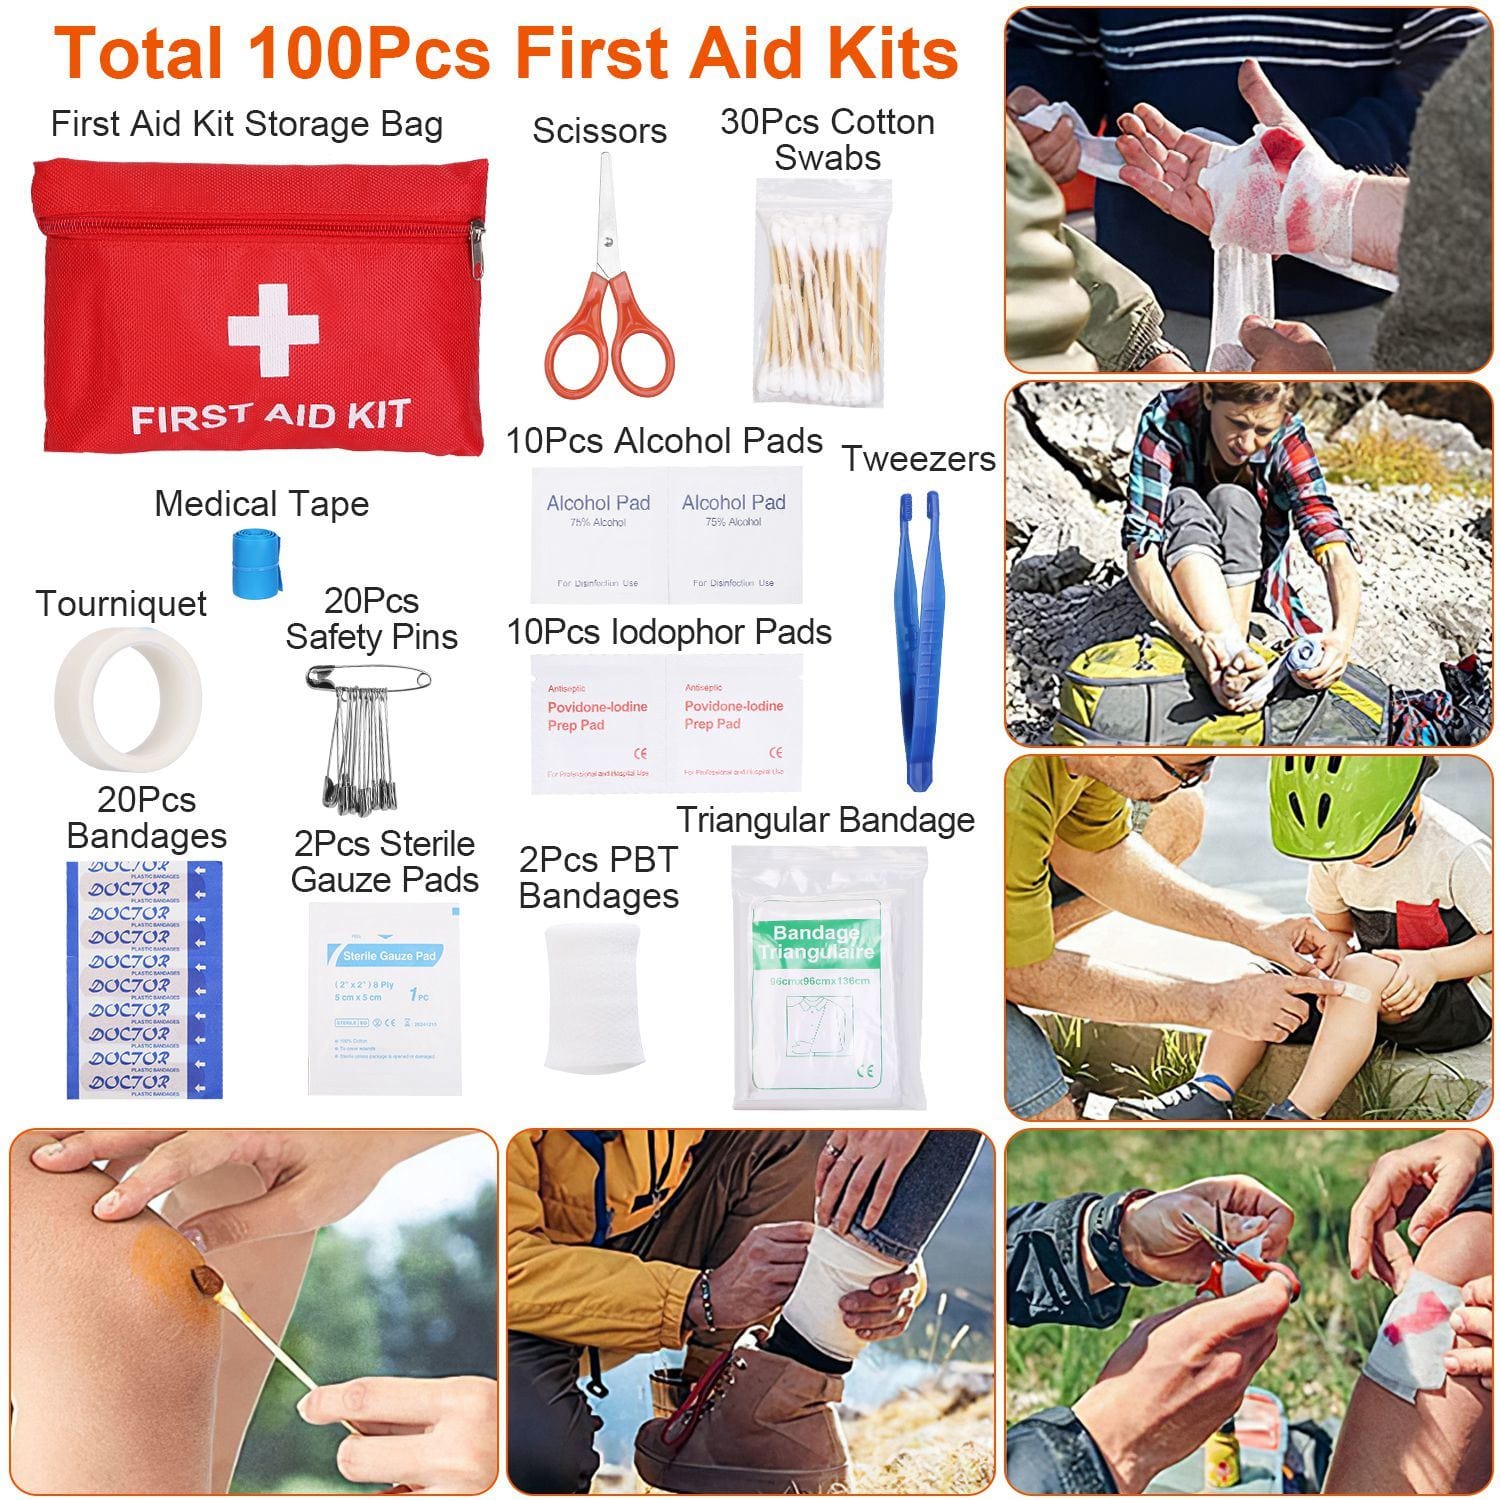 Ultimate Outdoor Survival Kit: 125pcs in One Pack - Emergency Survival Gear Tactical First Aid Kit Supplies For Outdoor Adventure Camping Hiking Hunting